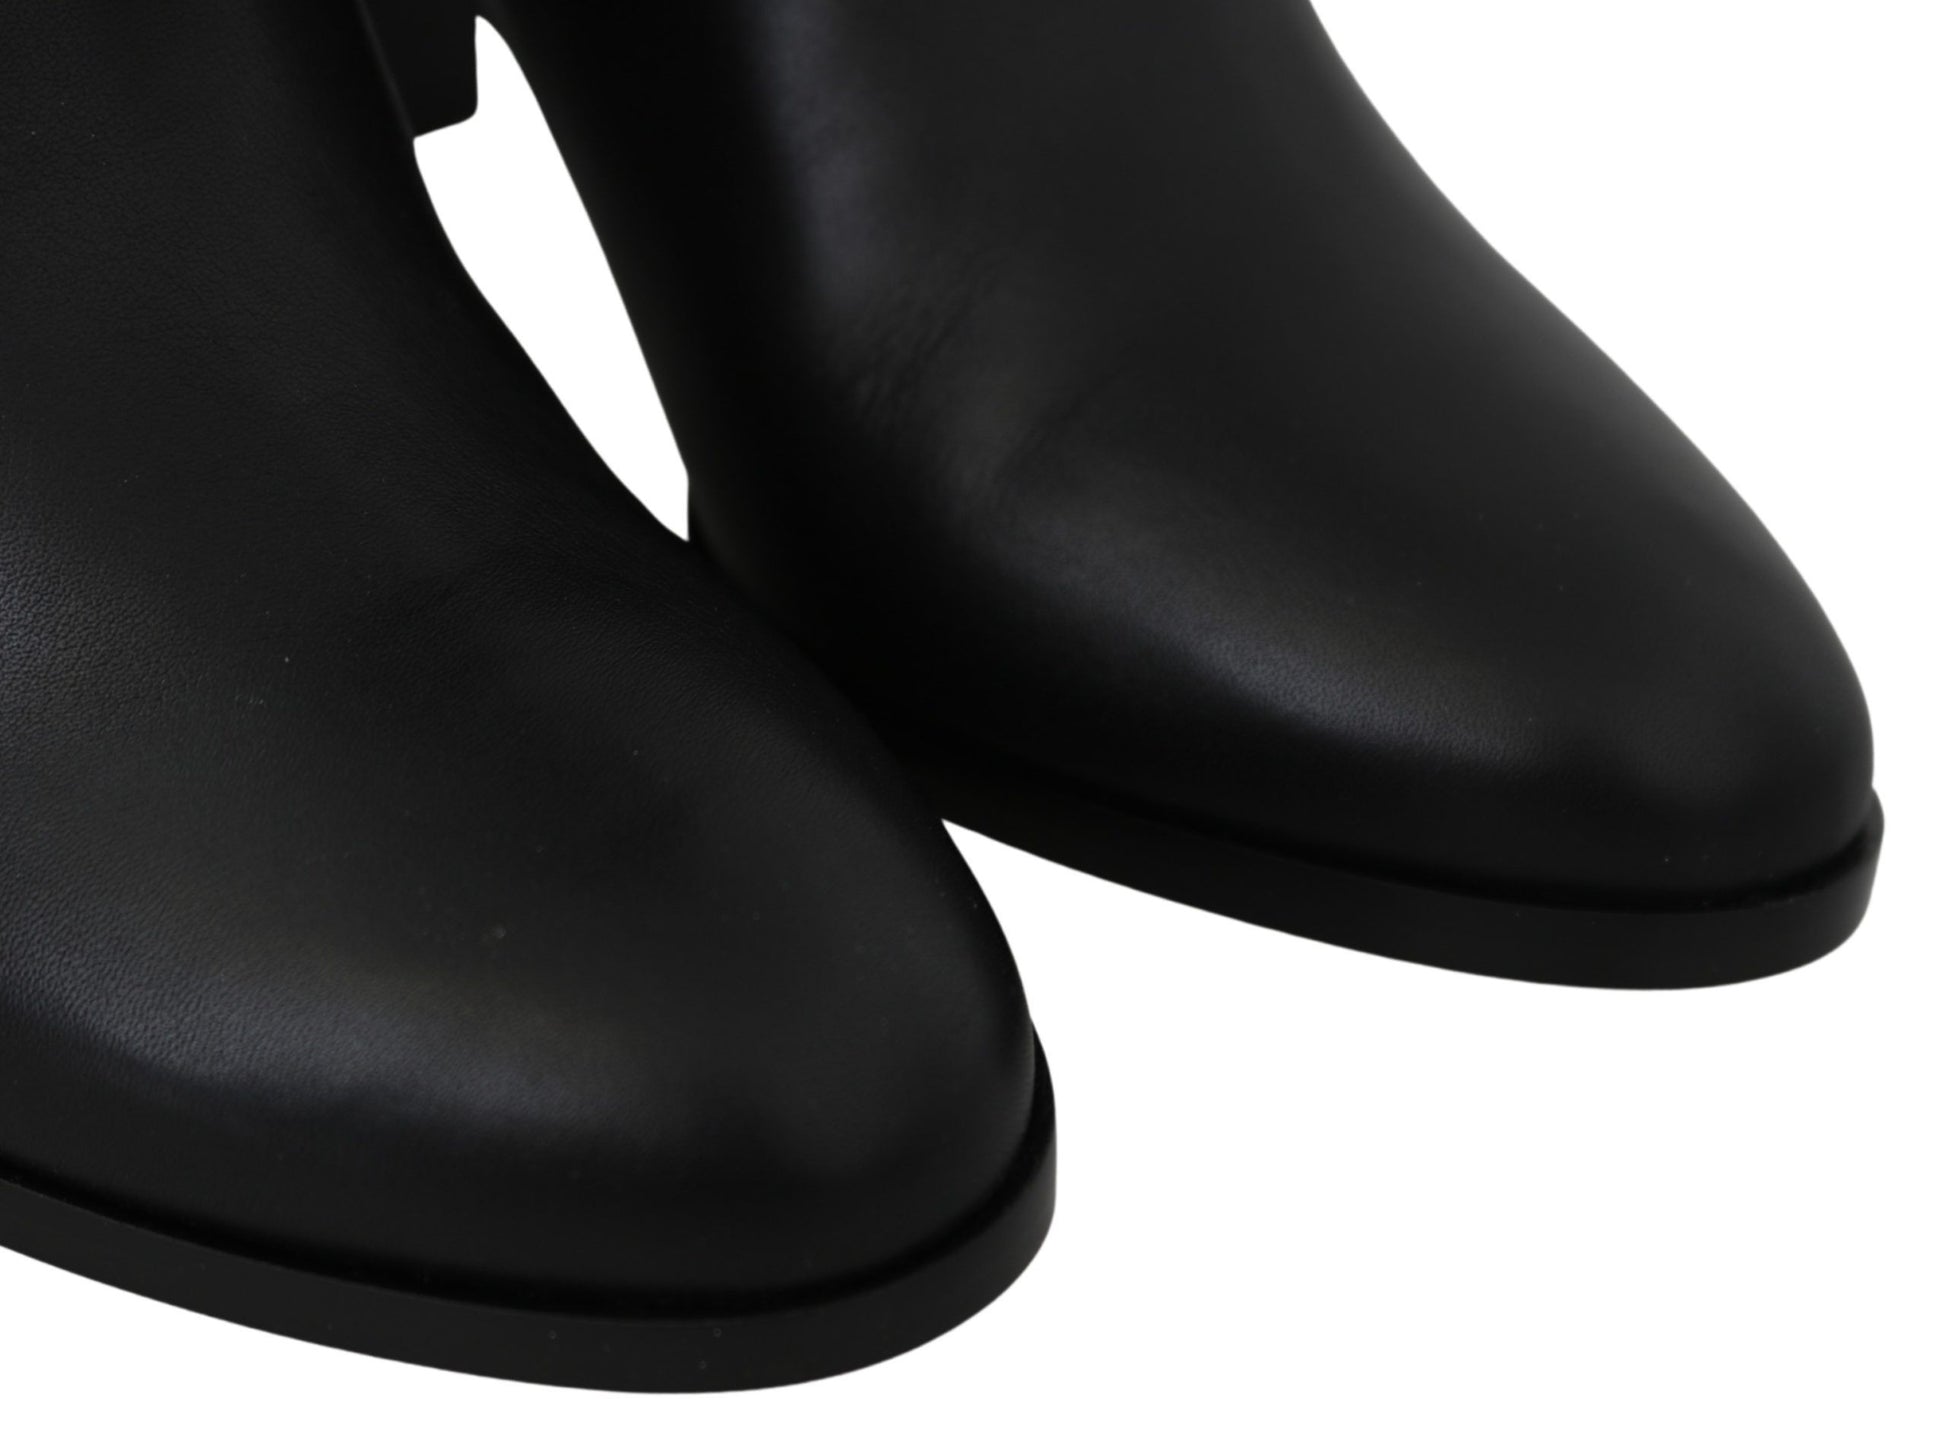 Jimmy Choo Madalie 80 Black Leather Boots - Designed by Jimmy Choo Available to Buy at a Discounted Price on Moon Behind The Hill Online Designer Discount Store